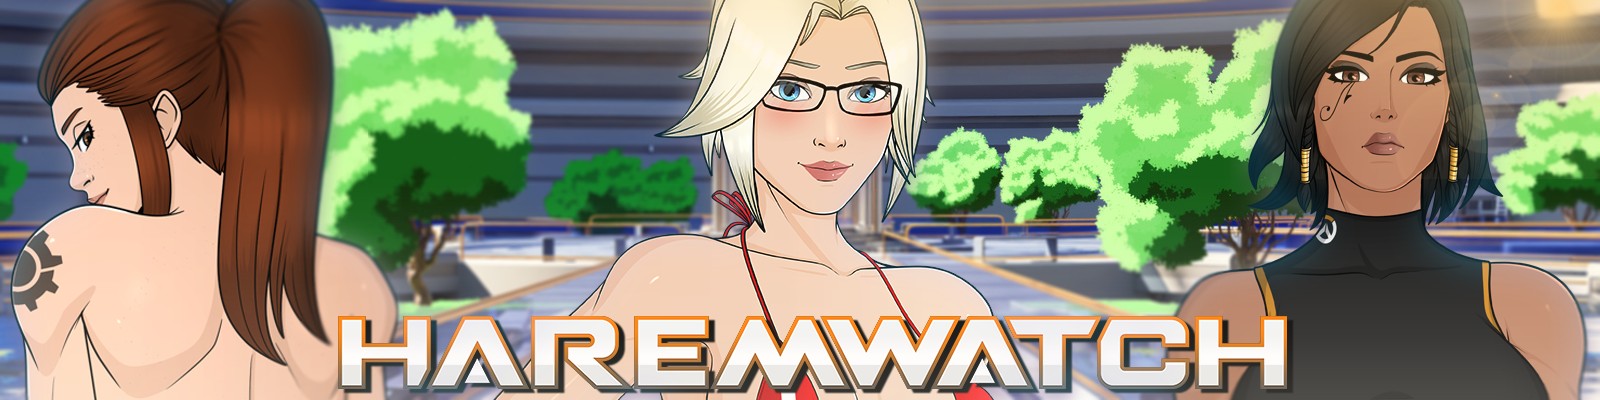 Haremwatch Adult Game Android Apk Download (2)